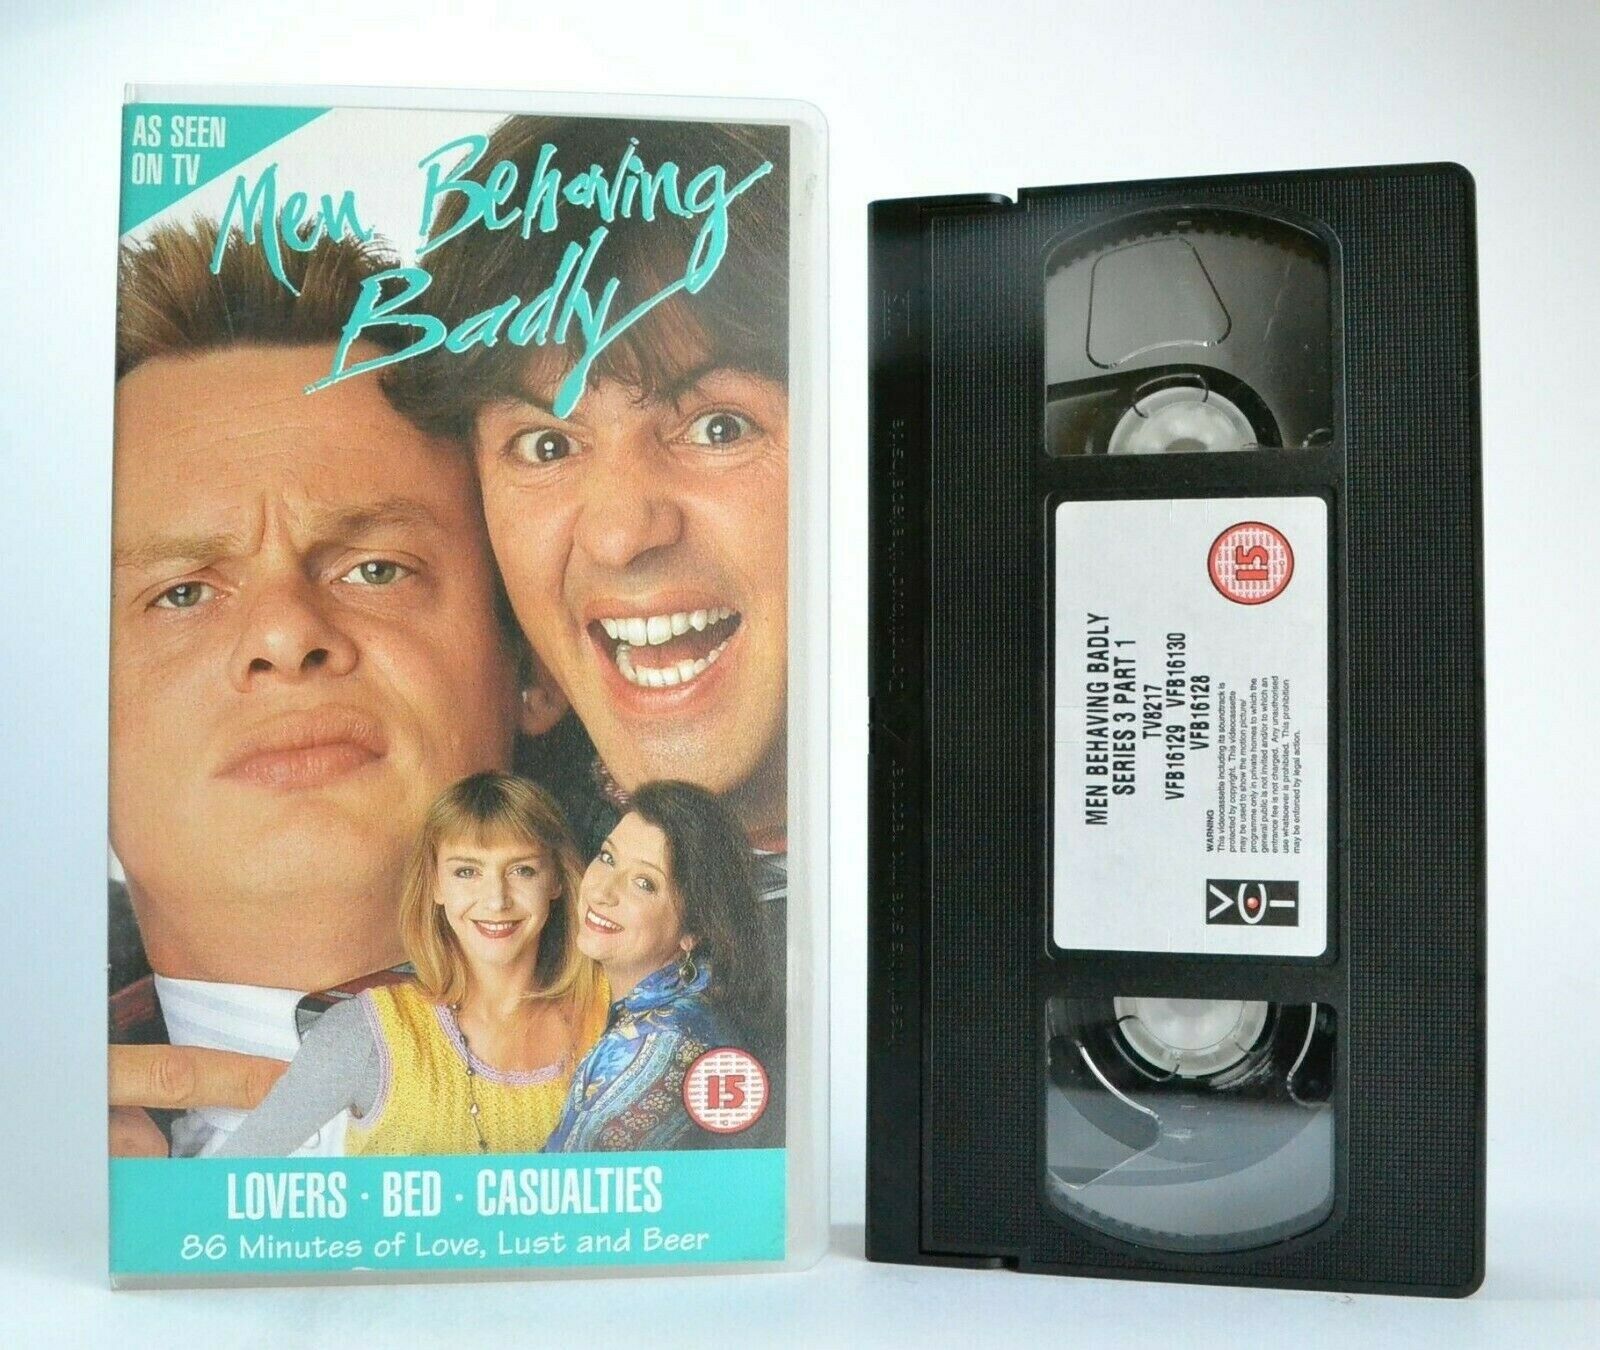 Men Behaving Badly: Lovers, Bed, Casualities - Sitcom - Situation Comedy - VHS-